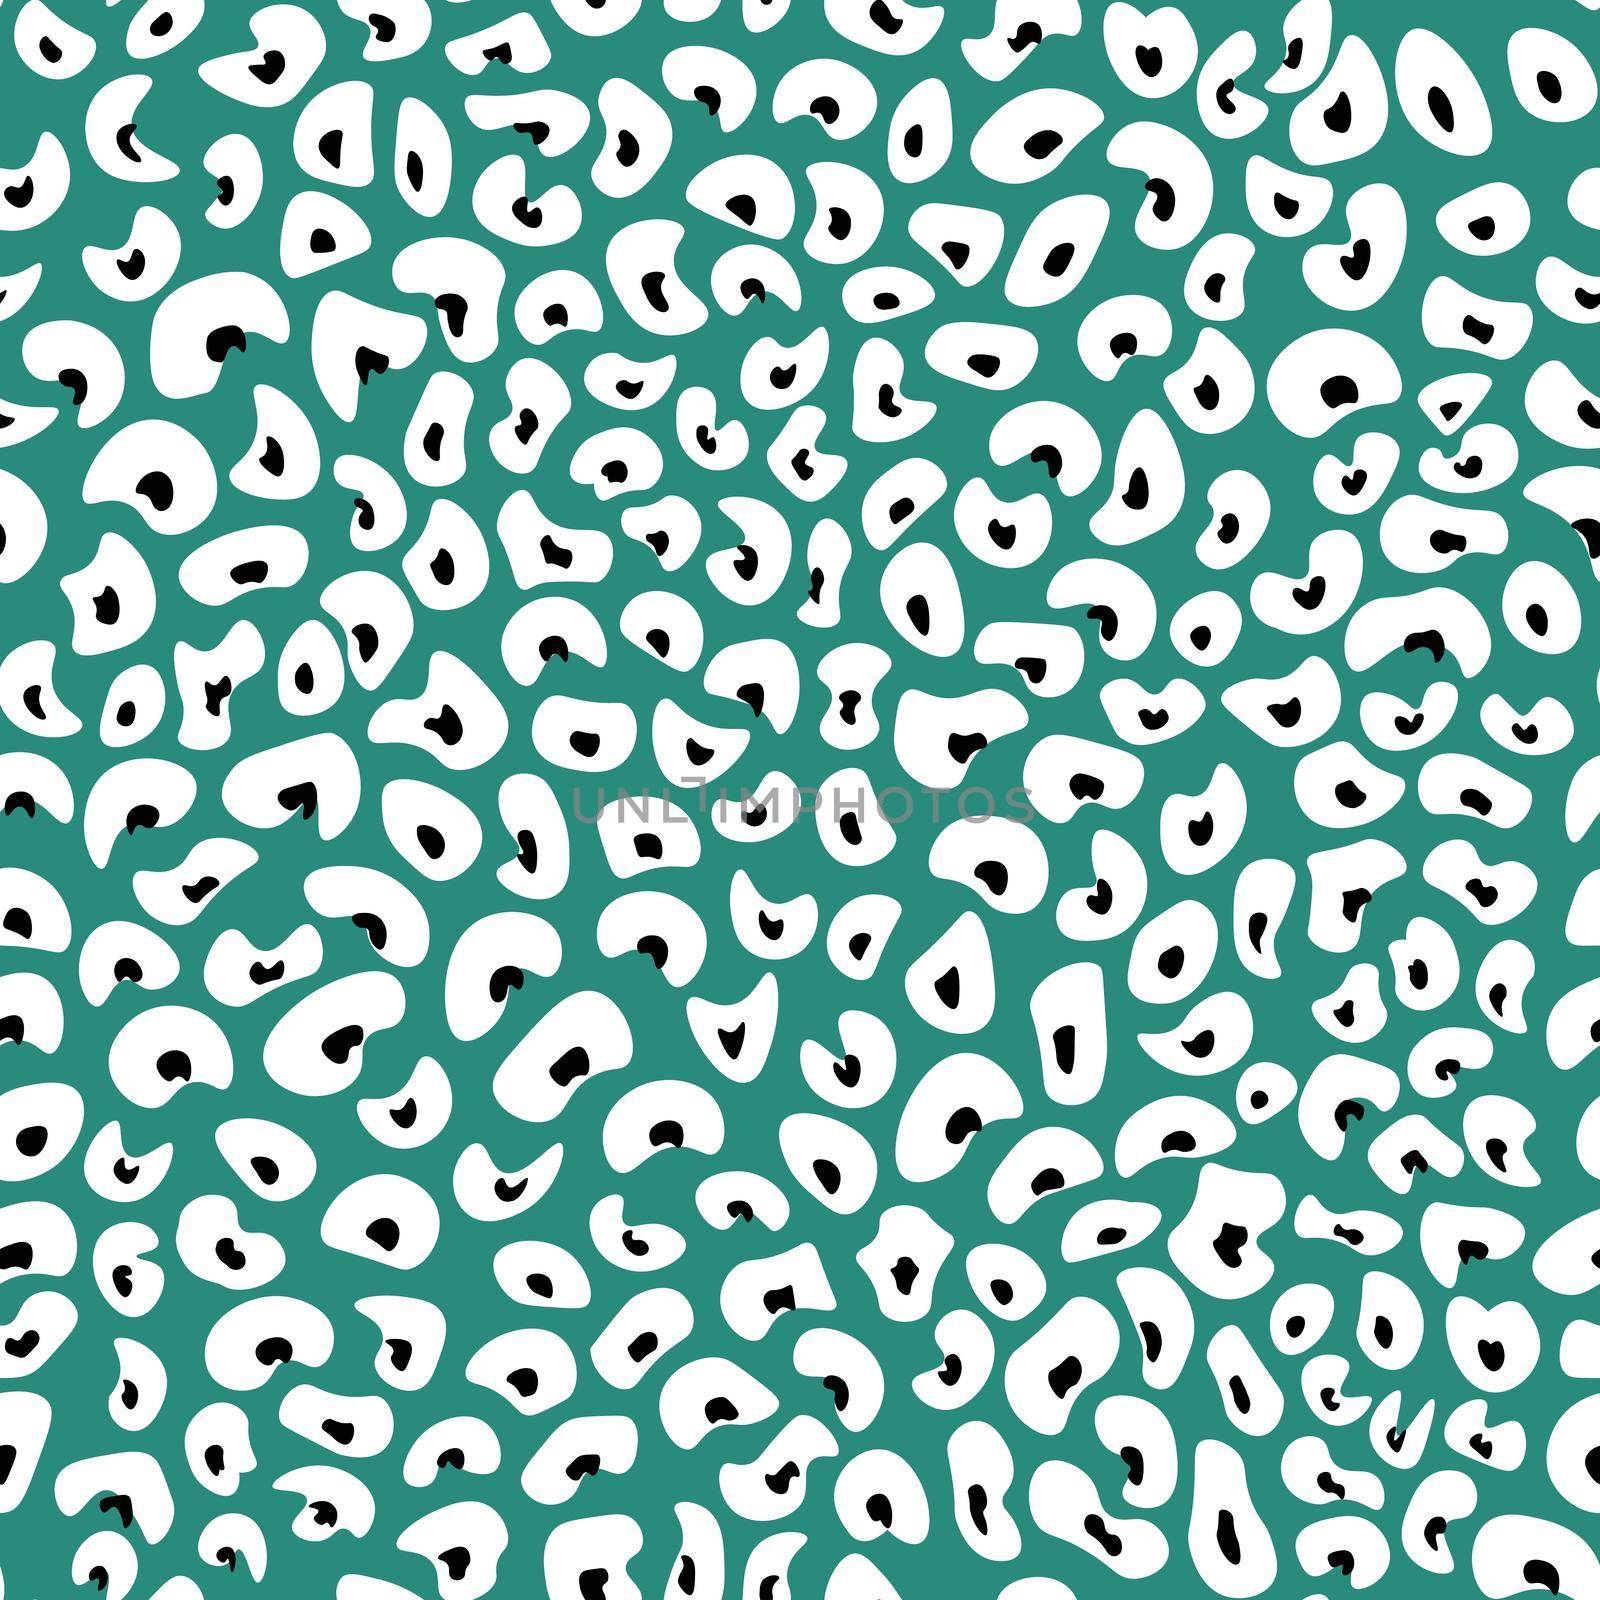 Abstract modern leopard seamless pattern. Animals trendy background. Green and black decorative vector stock illustration for print, card, postcard, fabric, textile. Modern ornament of stylized skin. by allaku